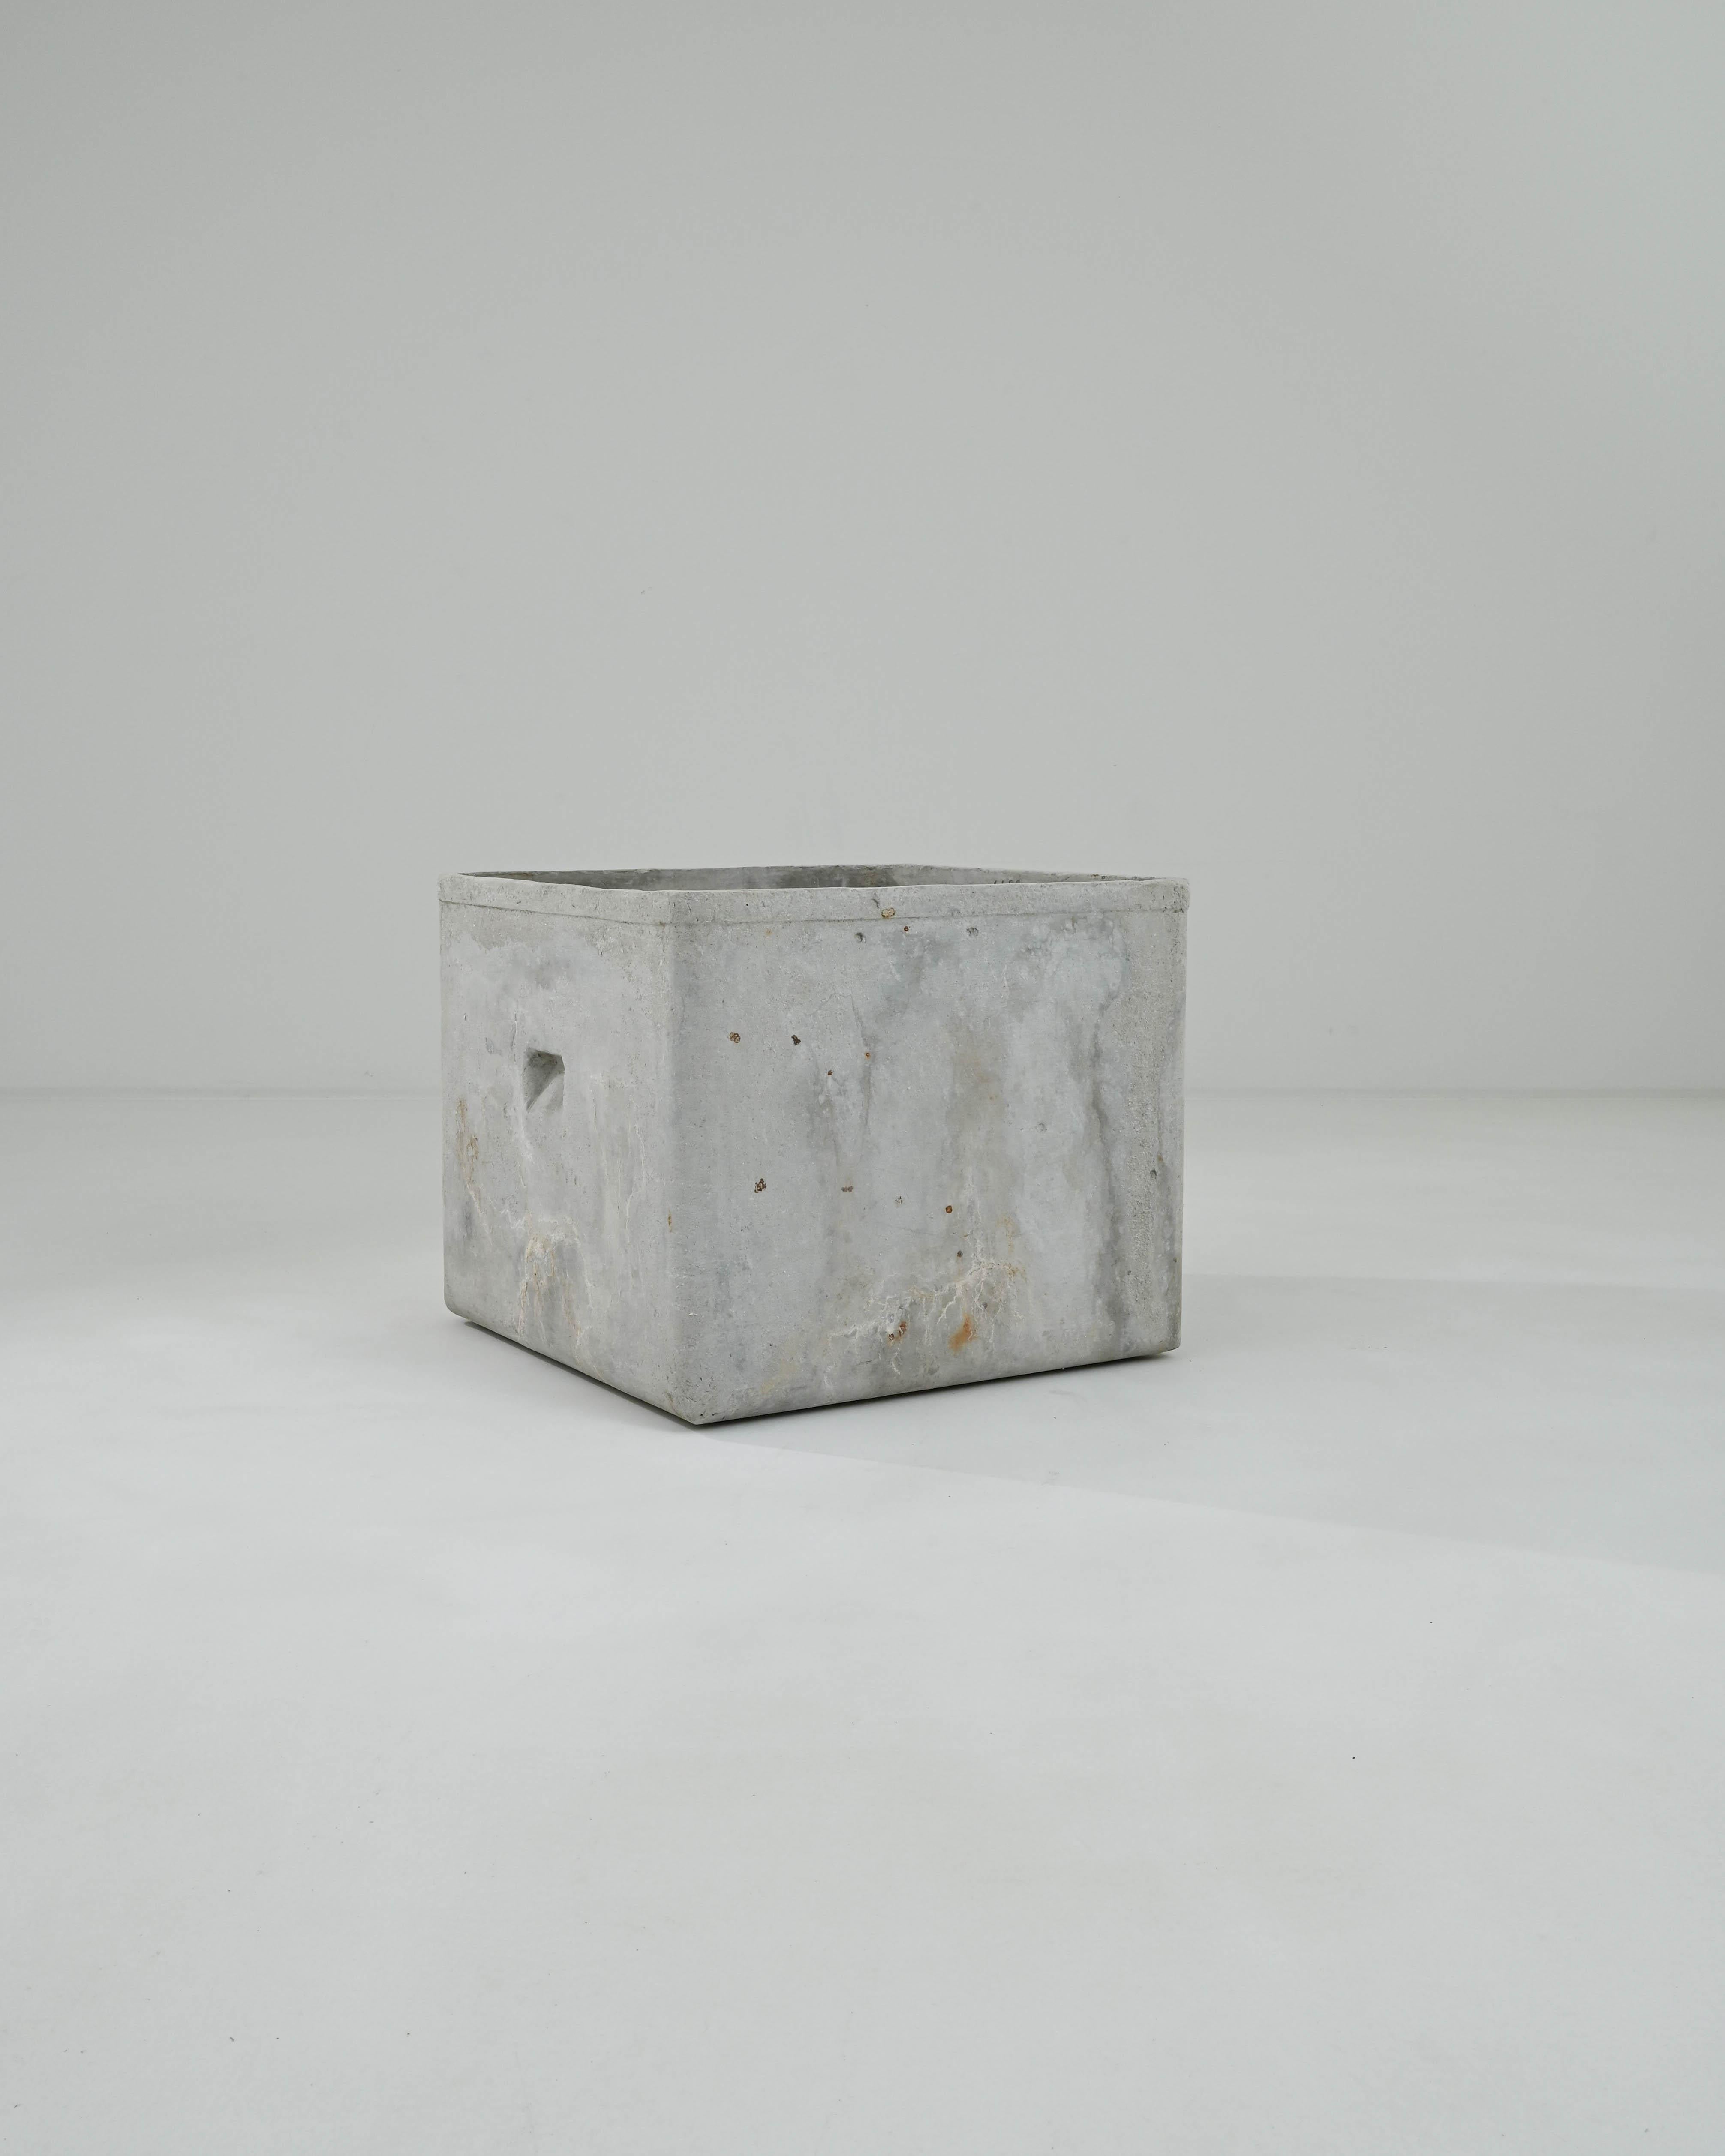 A minimalist shape combined with an evocative natural patina gives this vintage planter a unique personality. Made in France in the 1960s, the design has a simple appeal: a square container, unembellished save for the slight protrusion of the lip